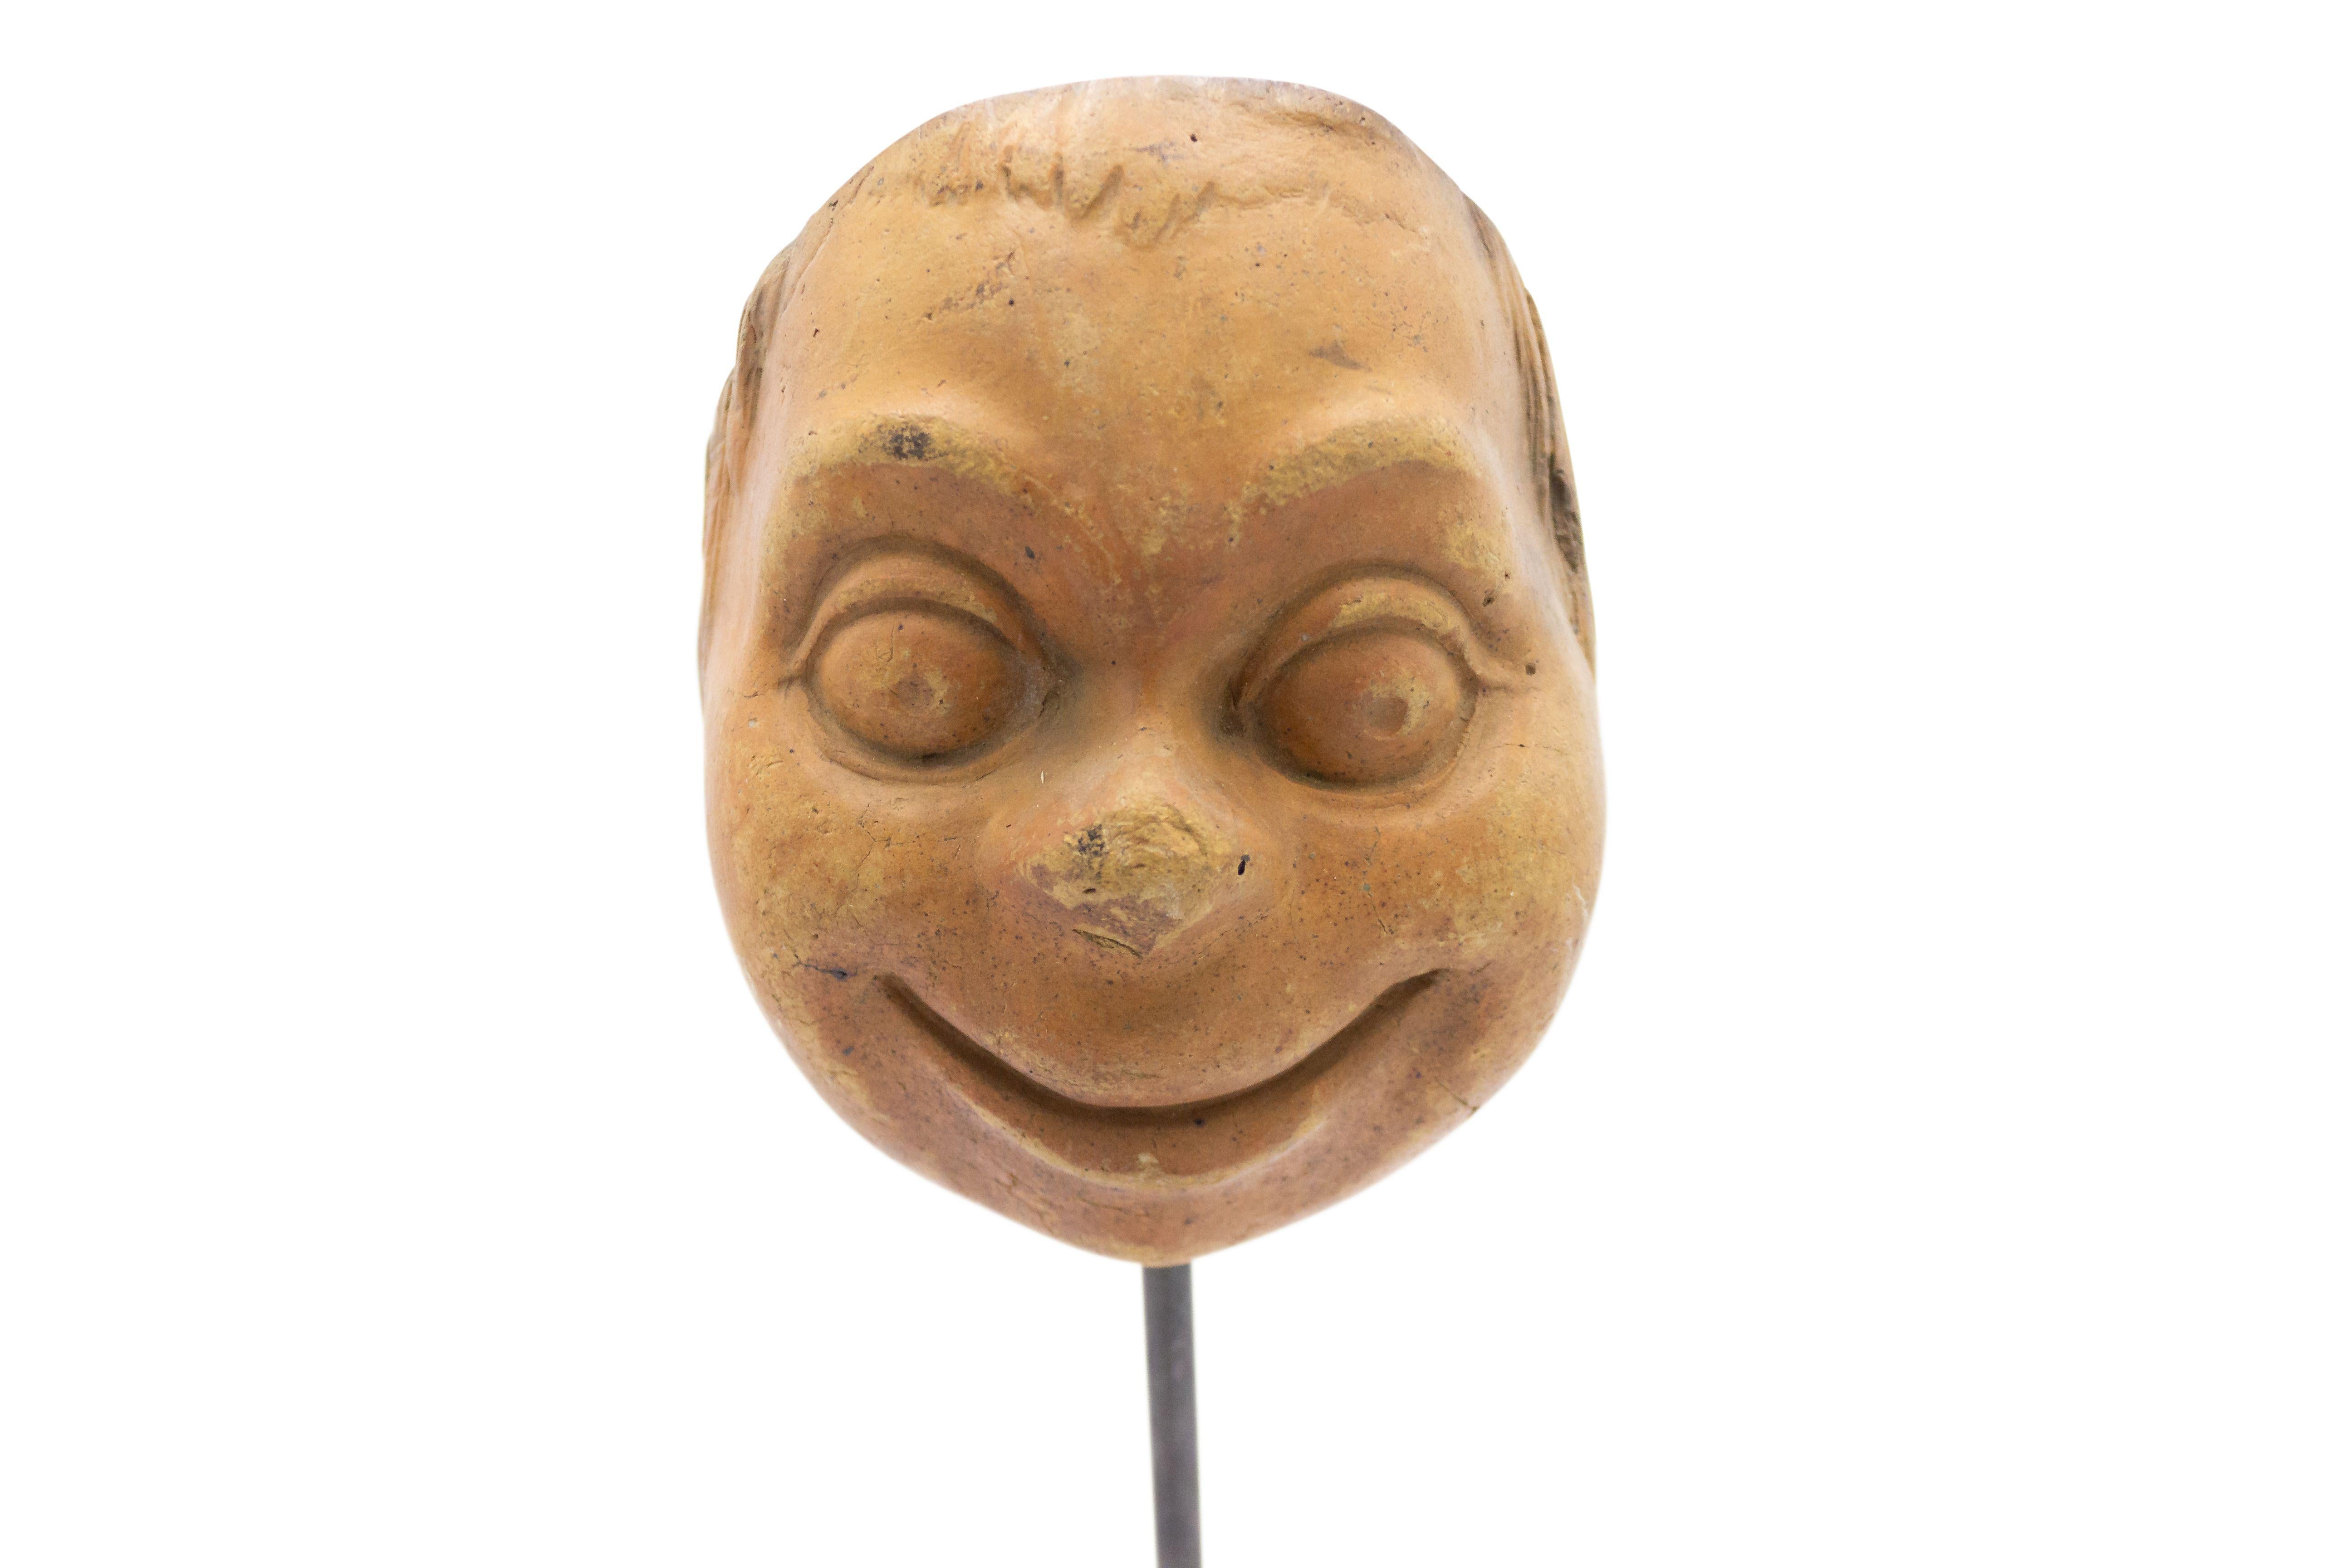 Continental German (late 19th Cent) sculpted terra-cotta master mask mold of a smiling google-eyed grotesque face displayed on a square black marble base stand (part of a collection).
 